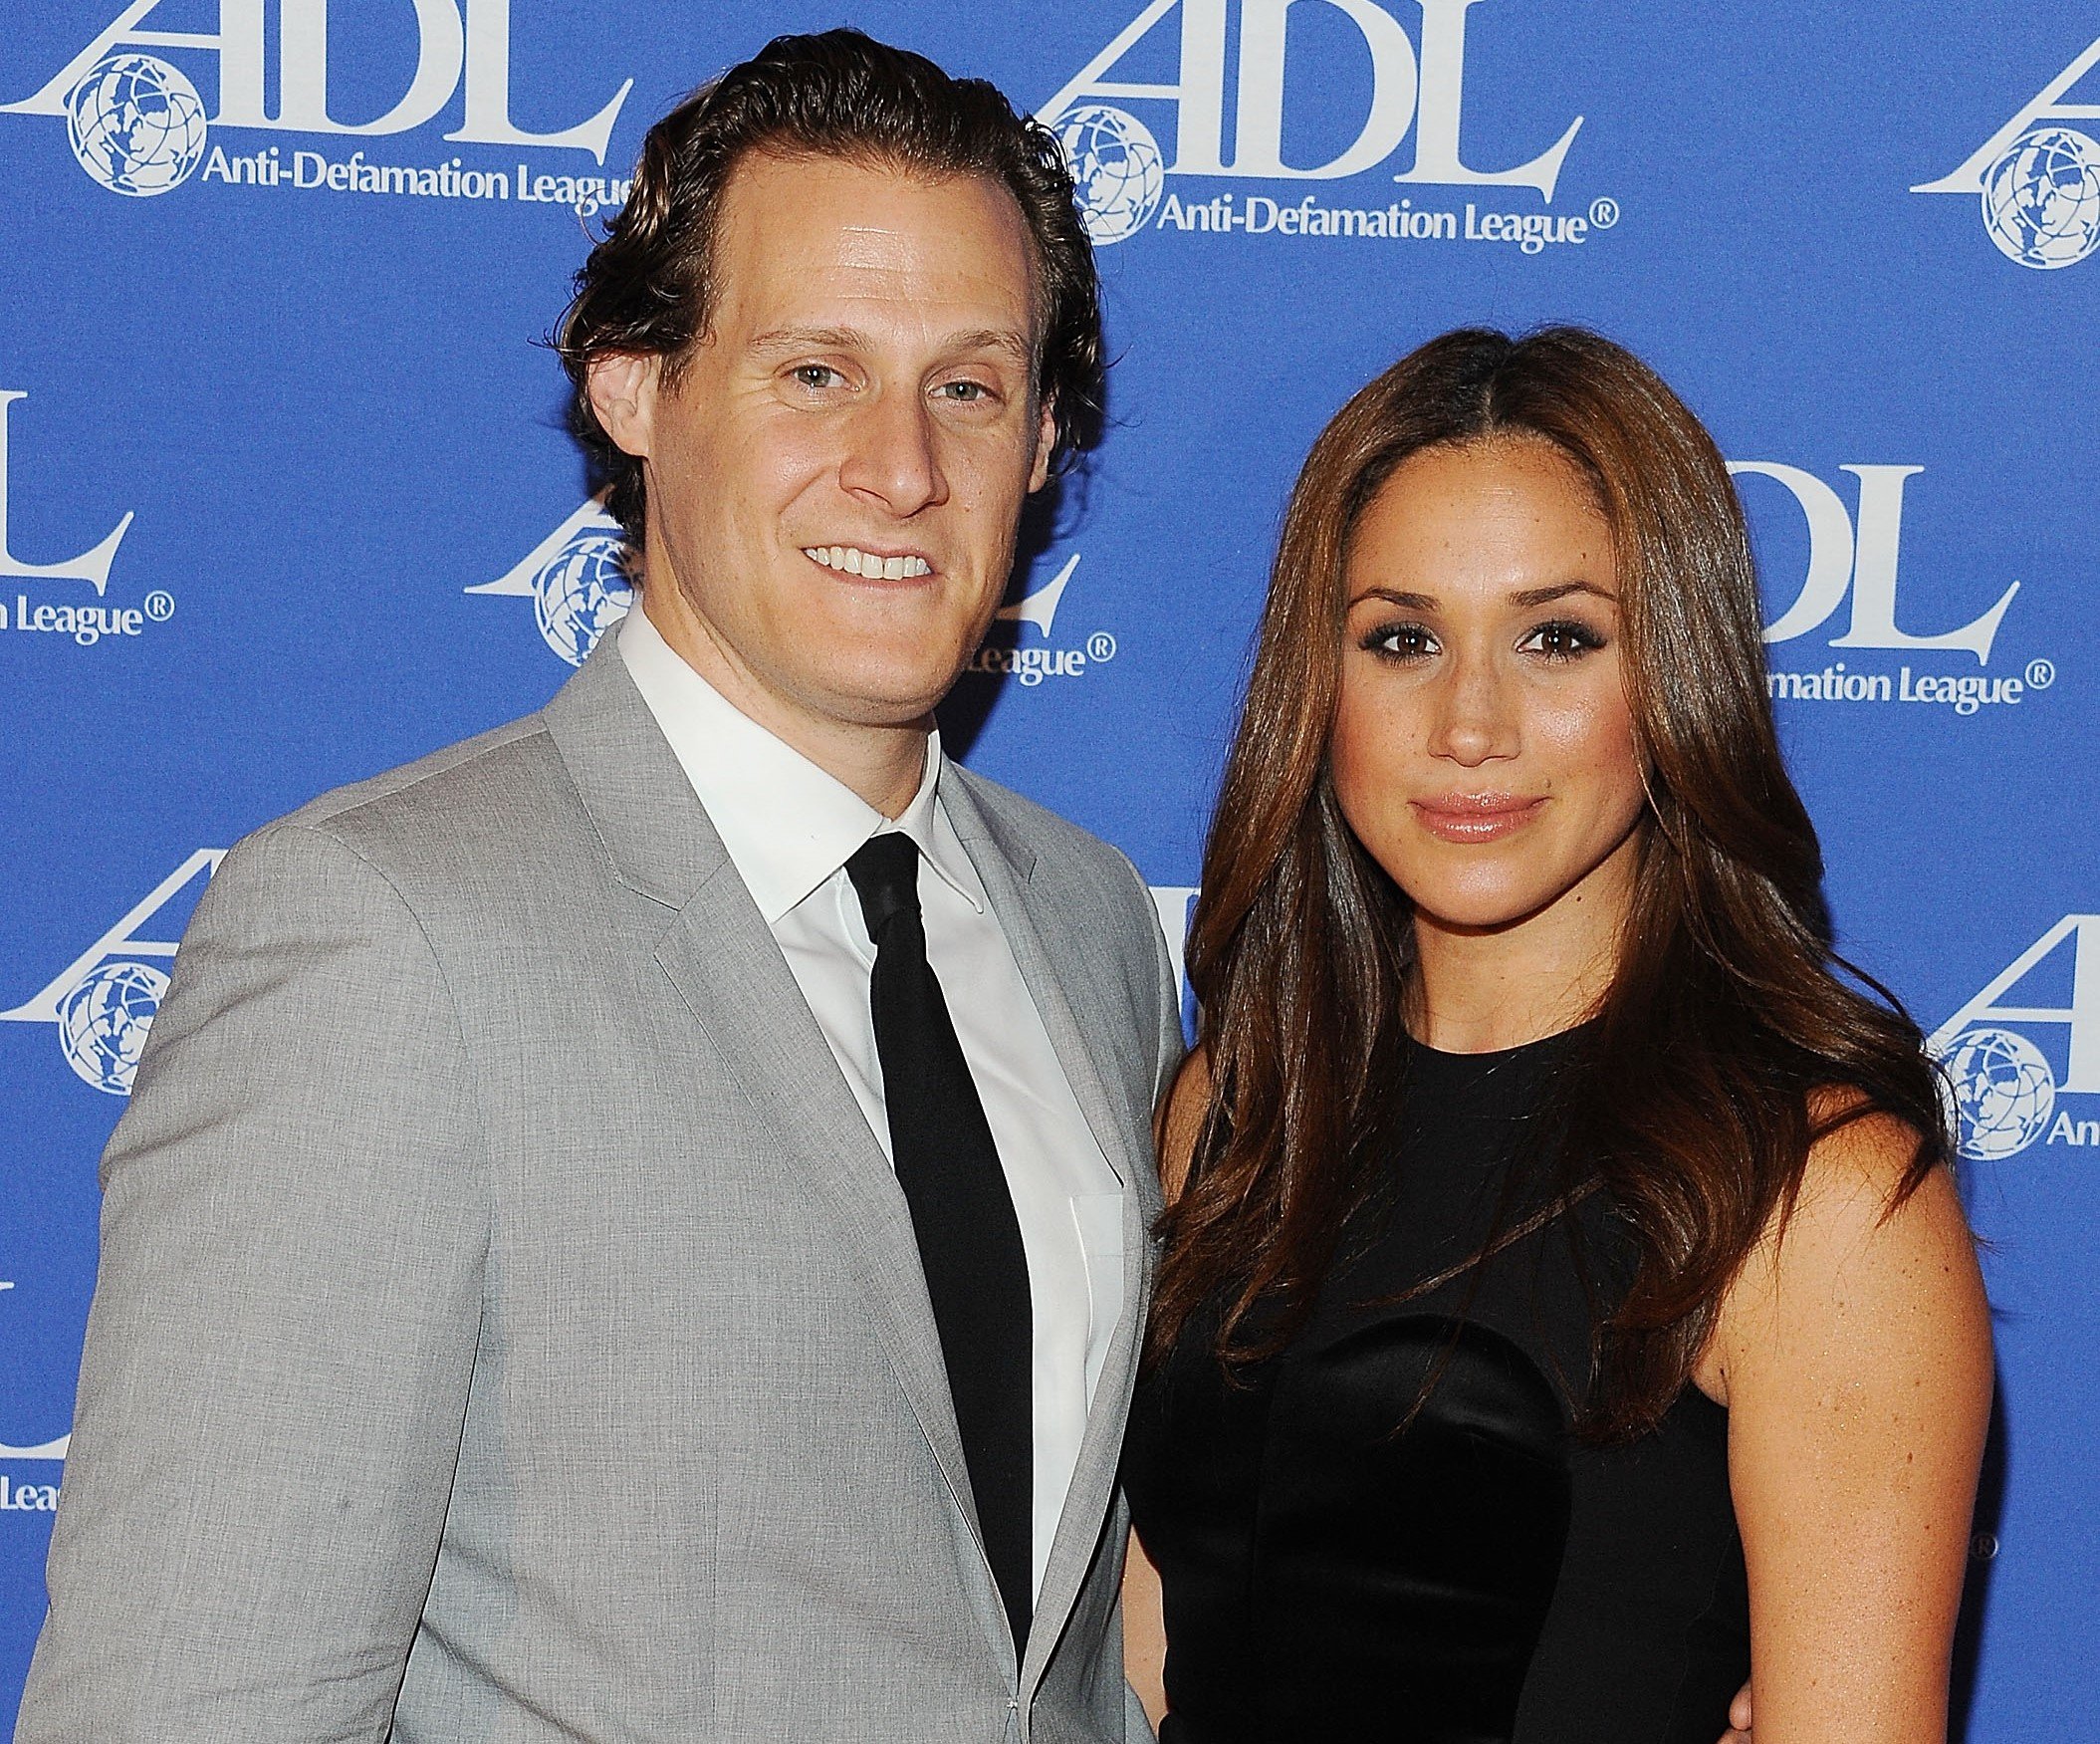 Trevor Engelson and Meghan Markle pose together on carpet at the Anti-Defamation League Entertainment Industry Awards